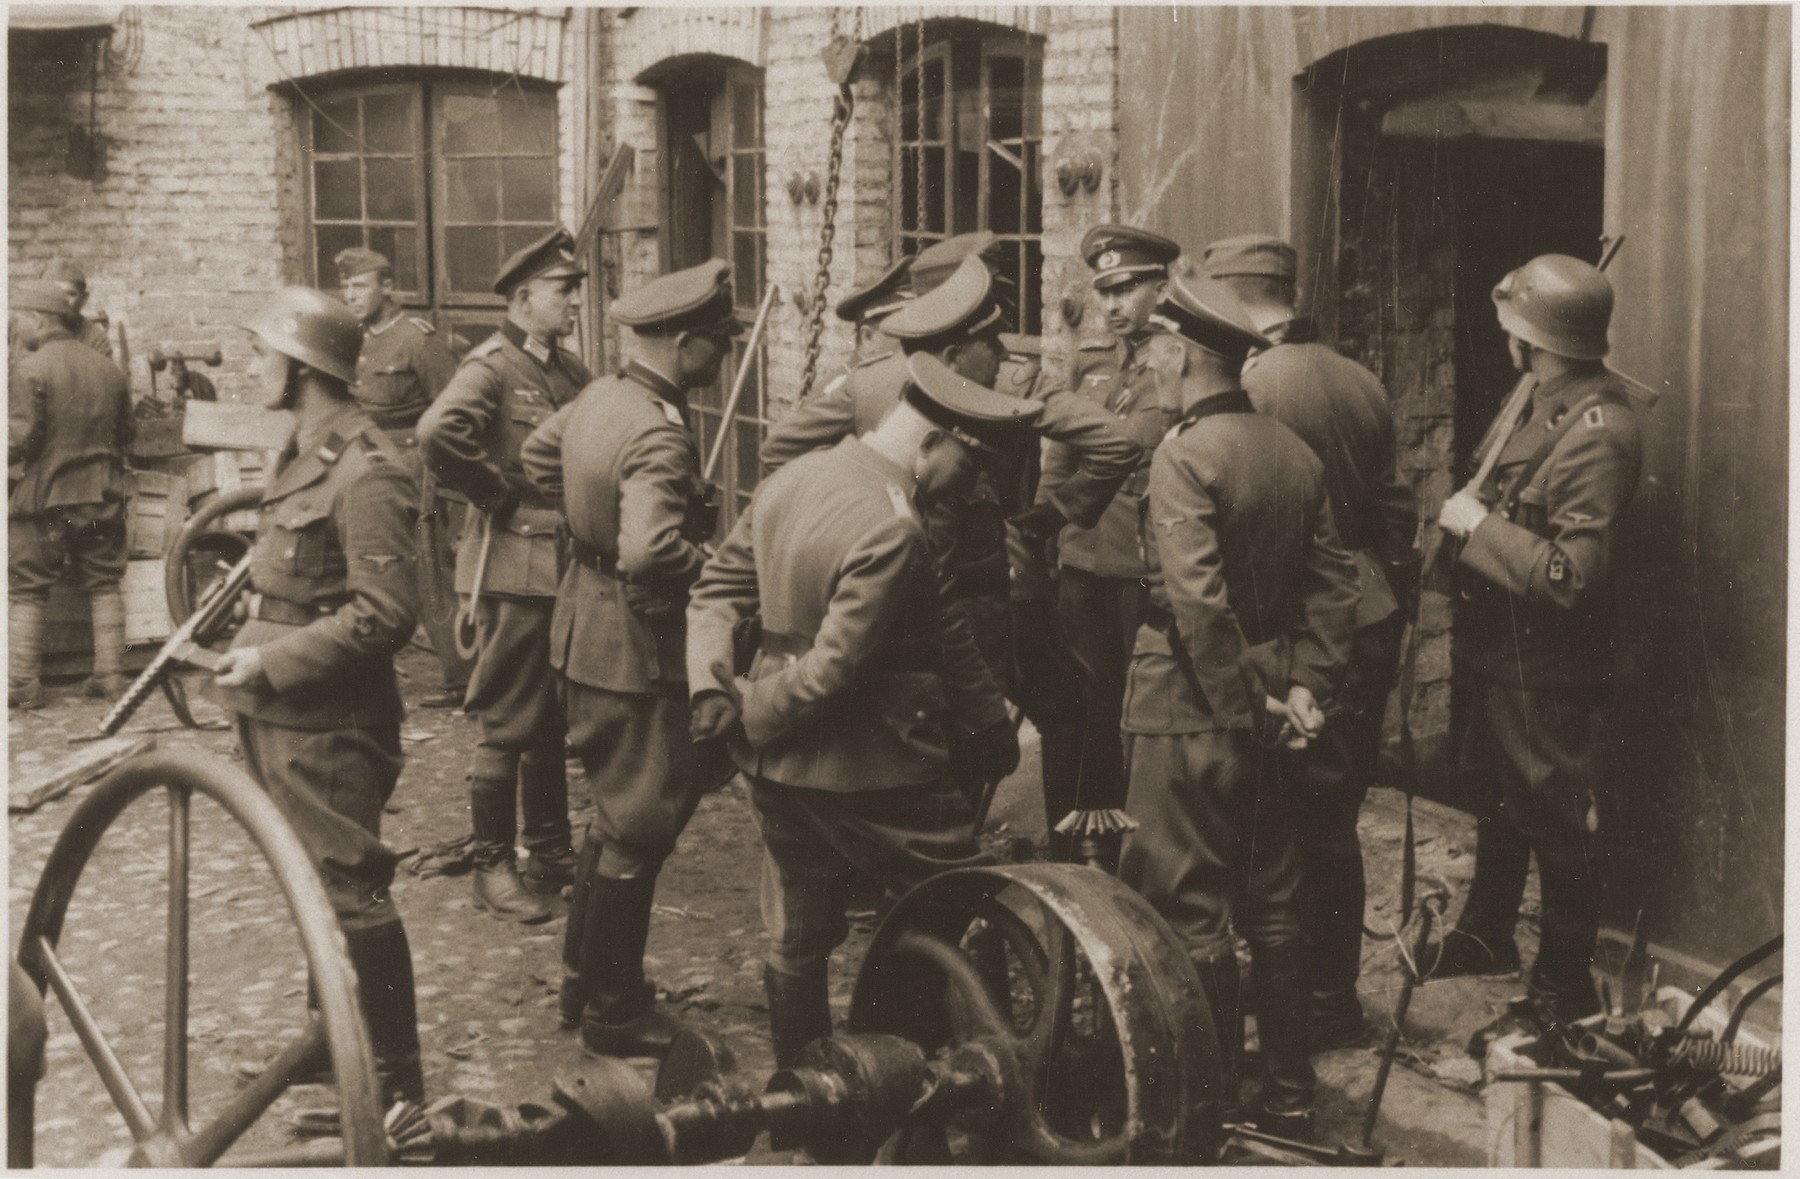 SS and German army officers, accompanied by SD guards, discuss the evacuation of a factory in the Warsaw ghetto during the uprising.  

The original caption reads: "Discussing the evacuation of an enterprise."